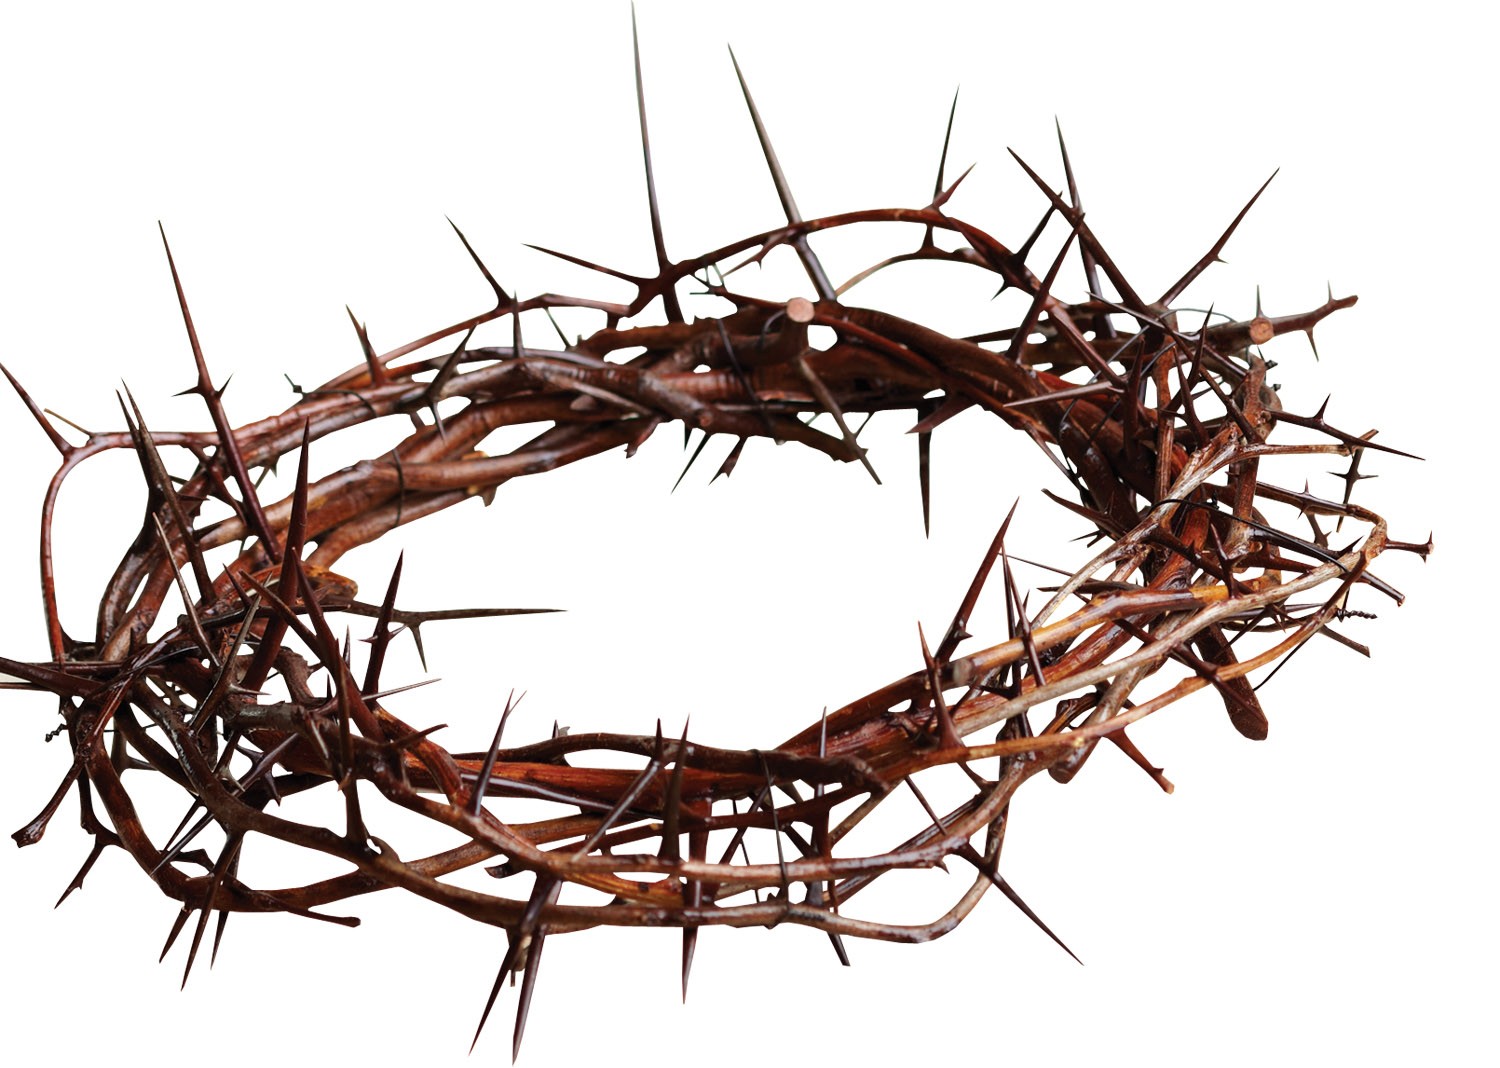 Crown Of Thorns drawing free image download